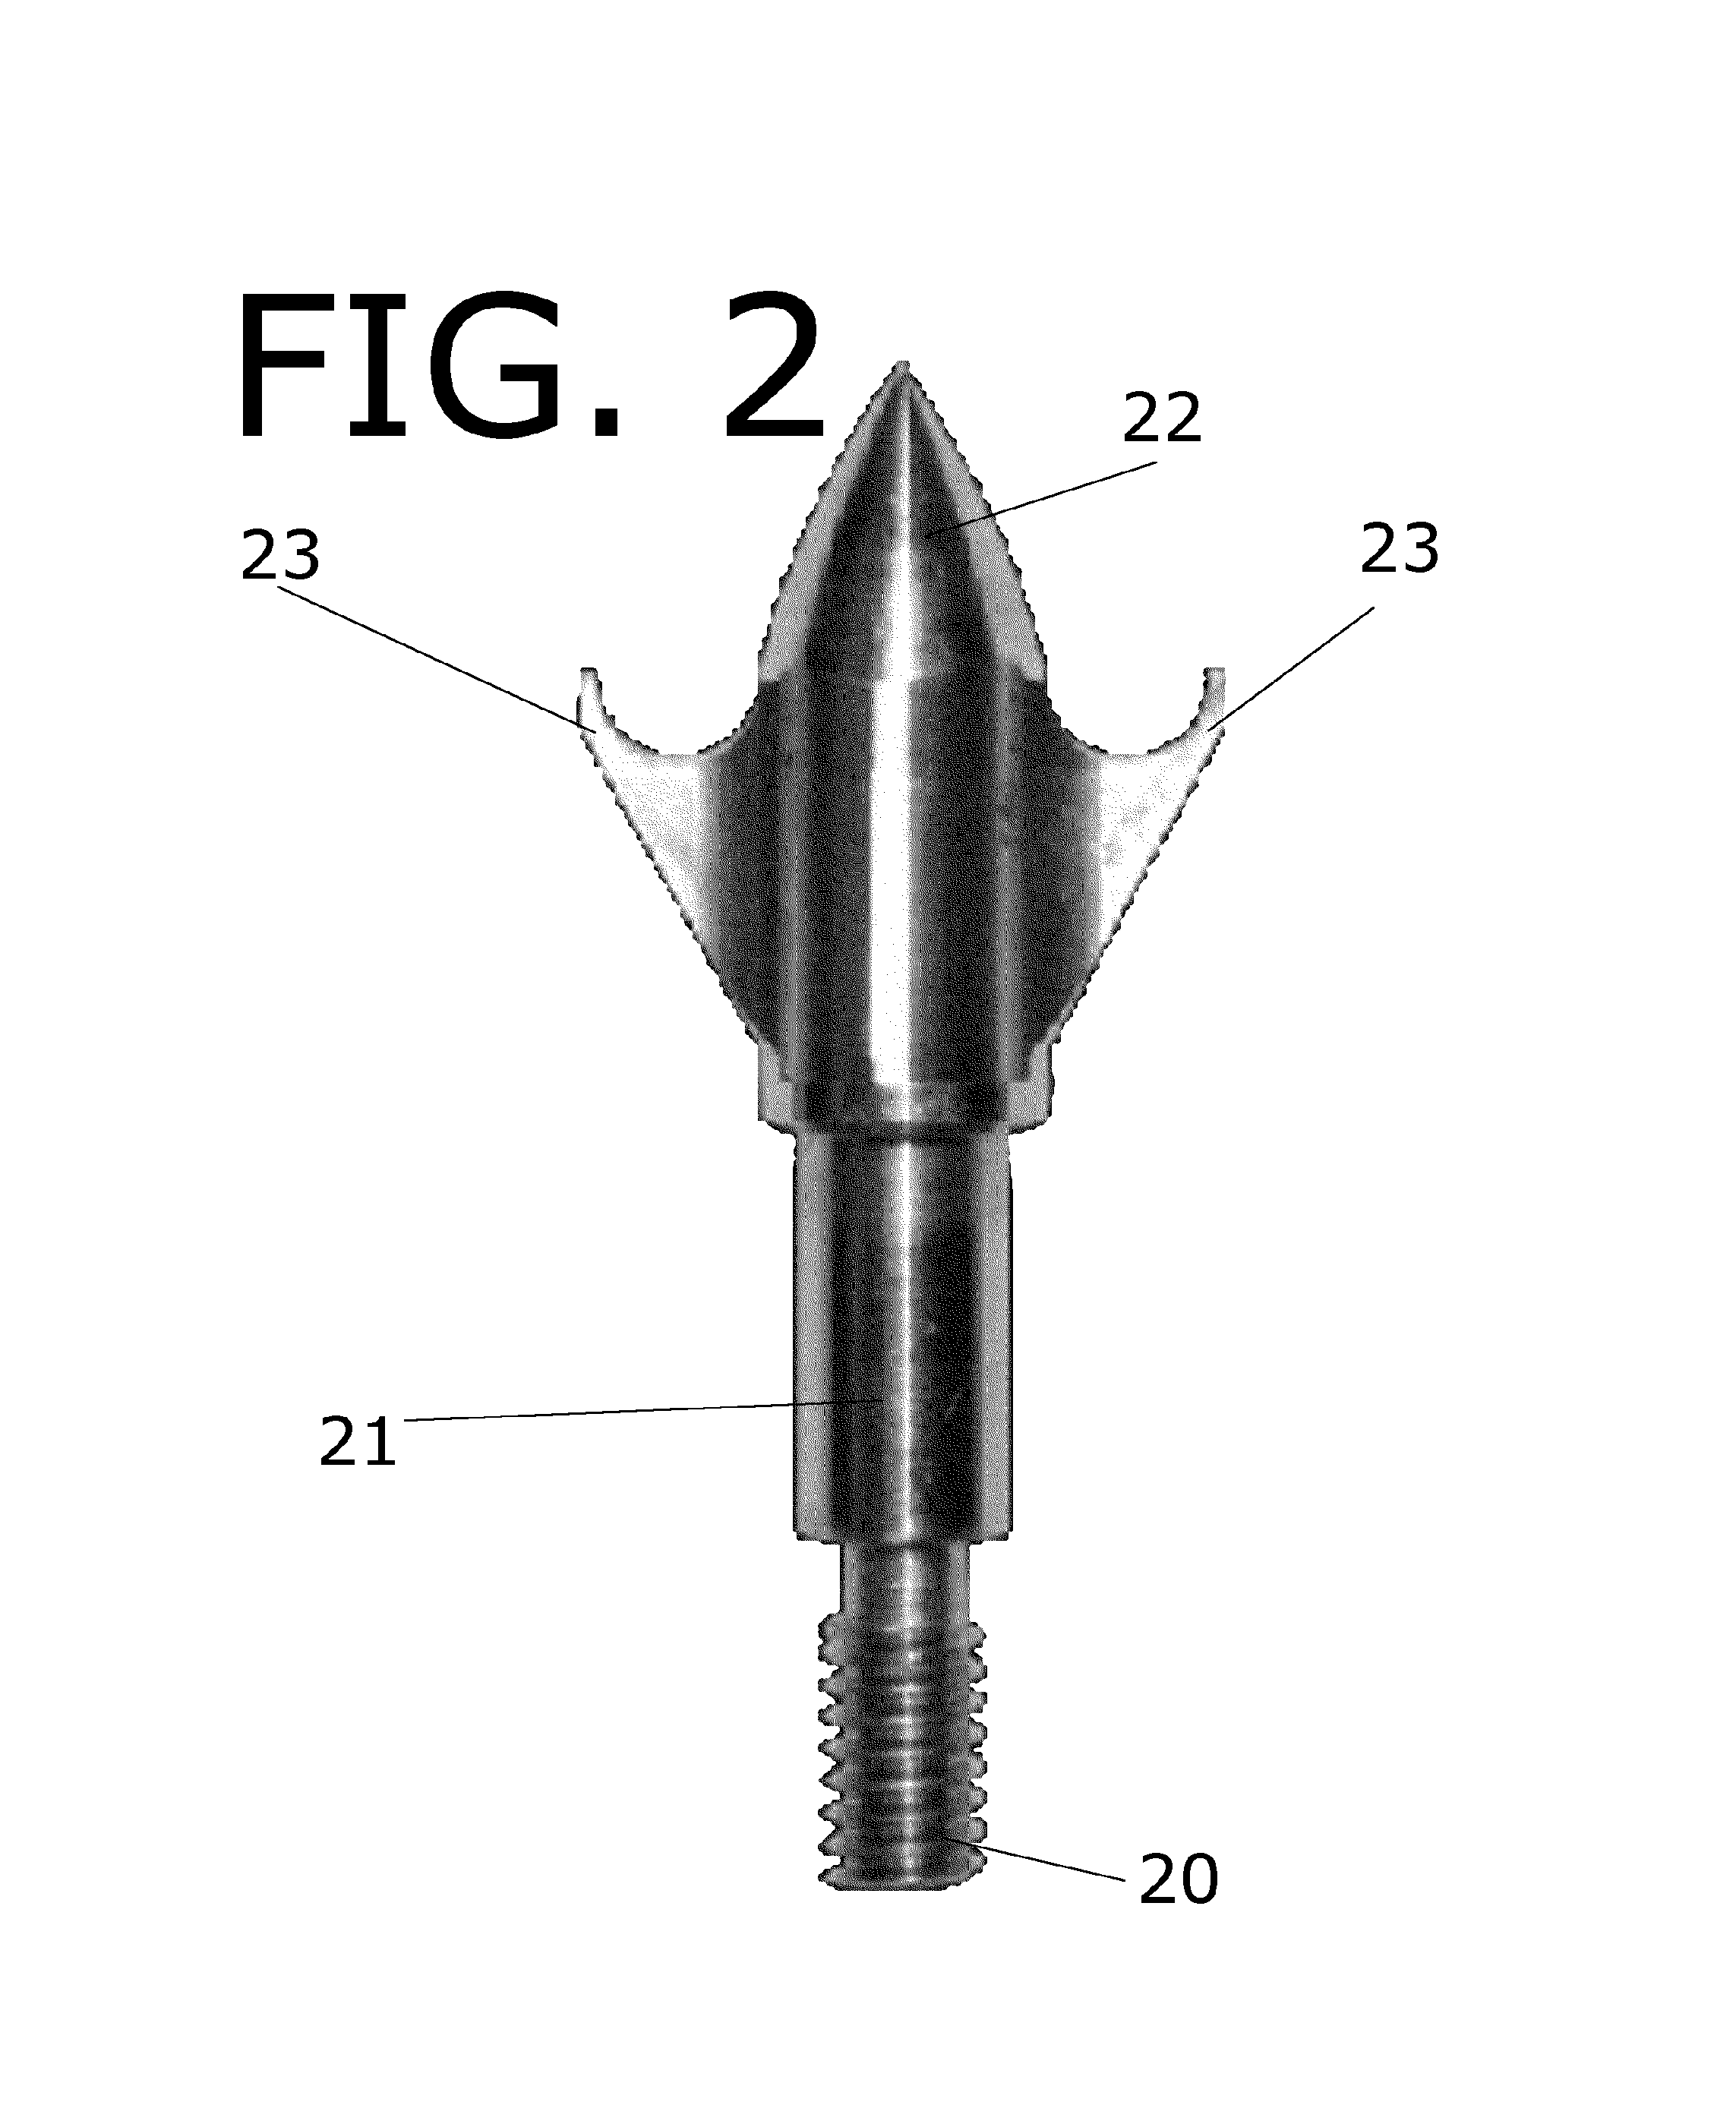 Hunting arrow tip and method of manufacture